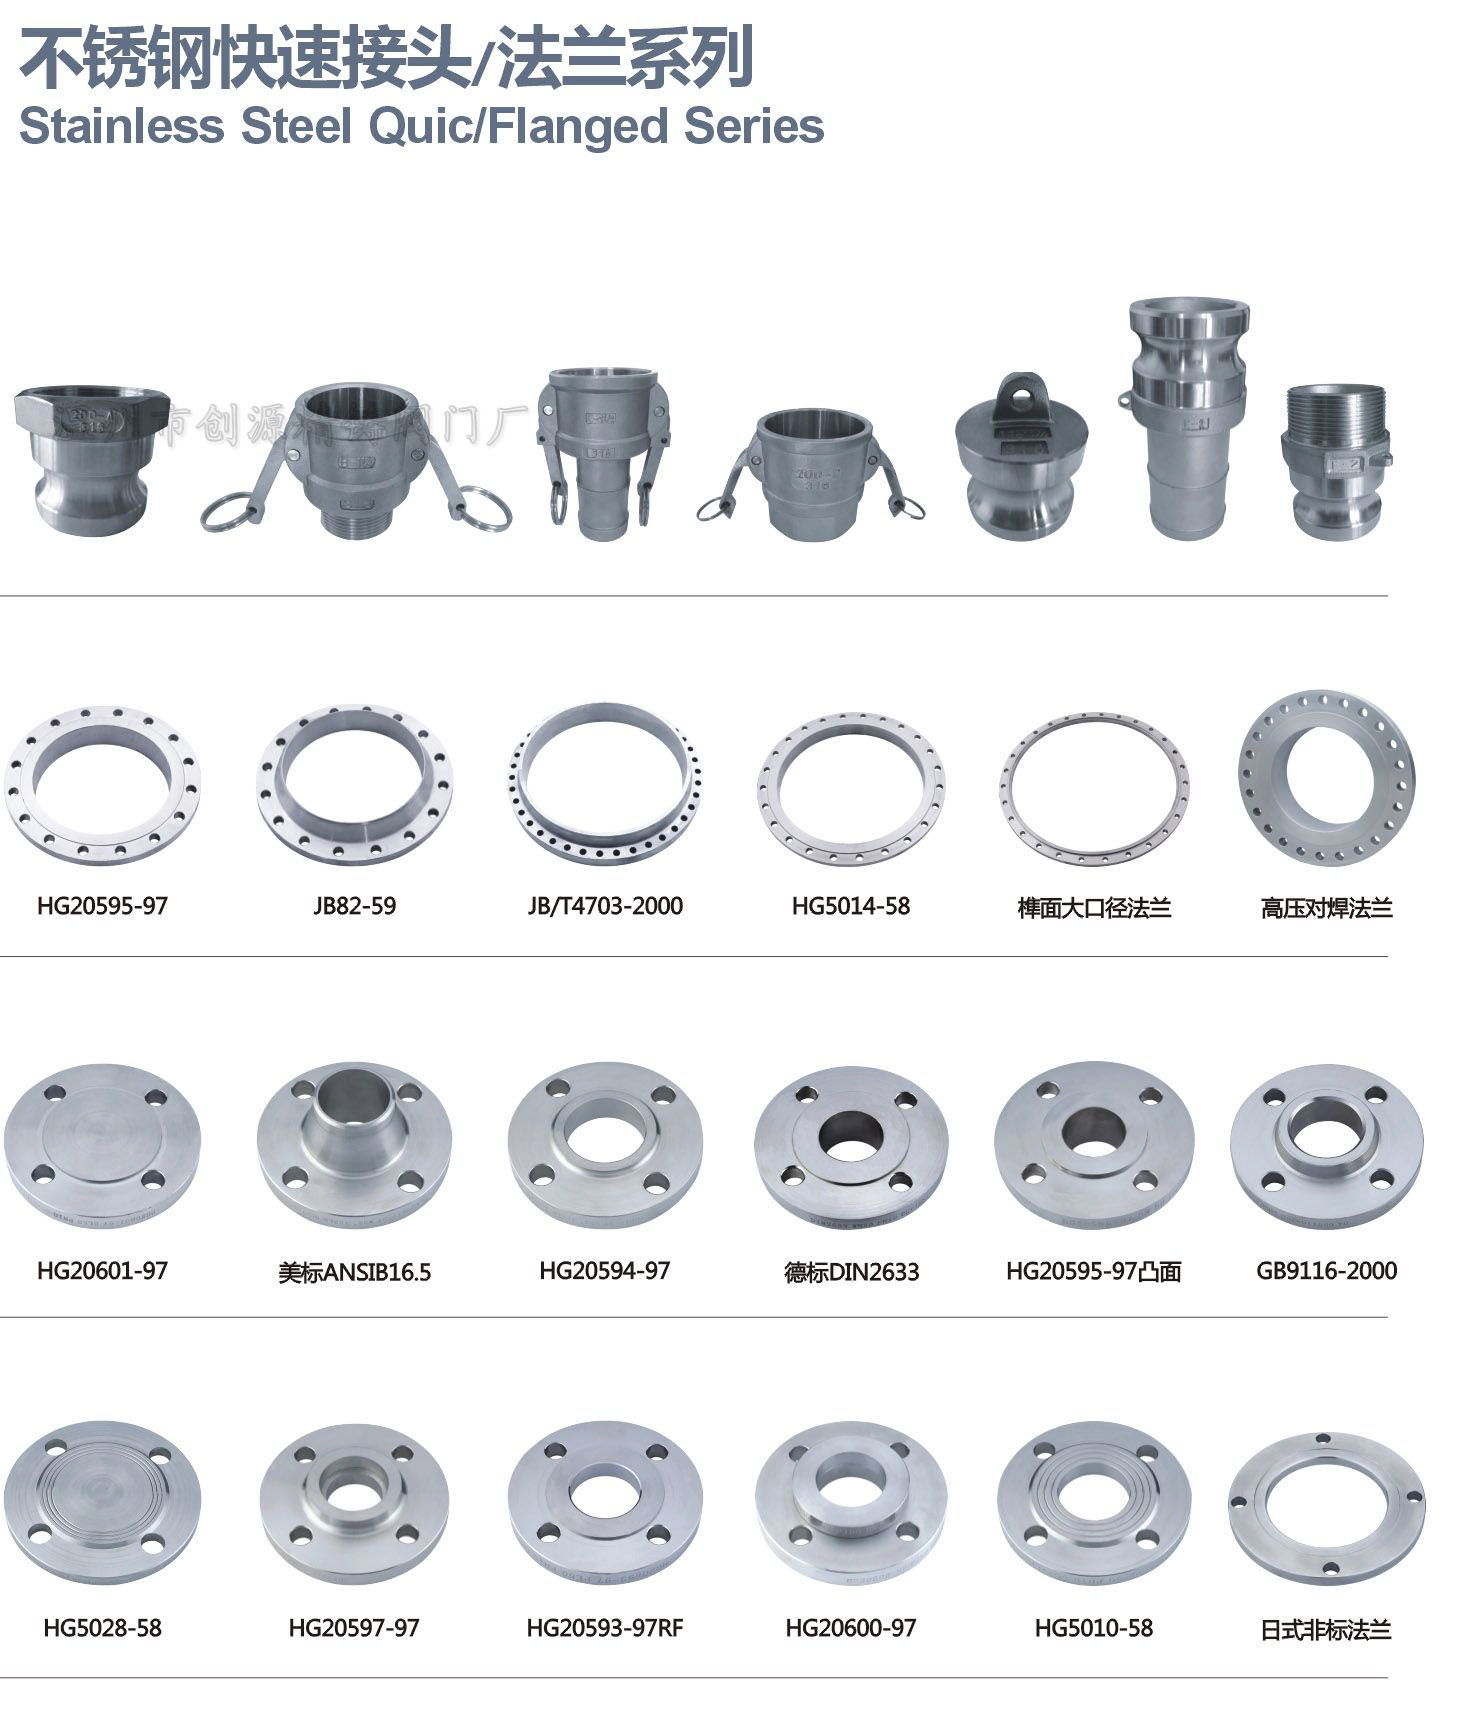 Stainless Steel Quic/Flanged Series